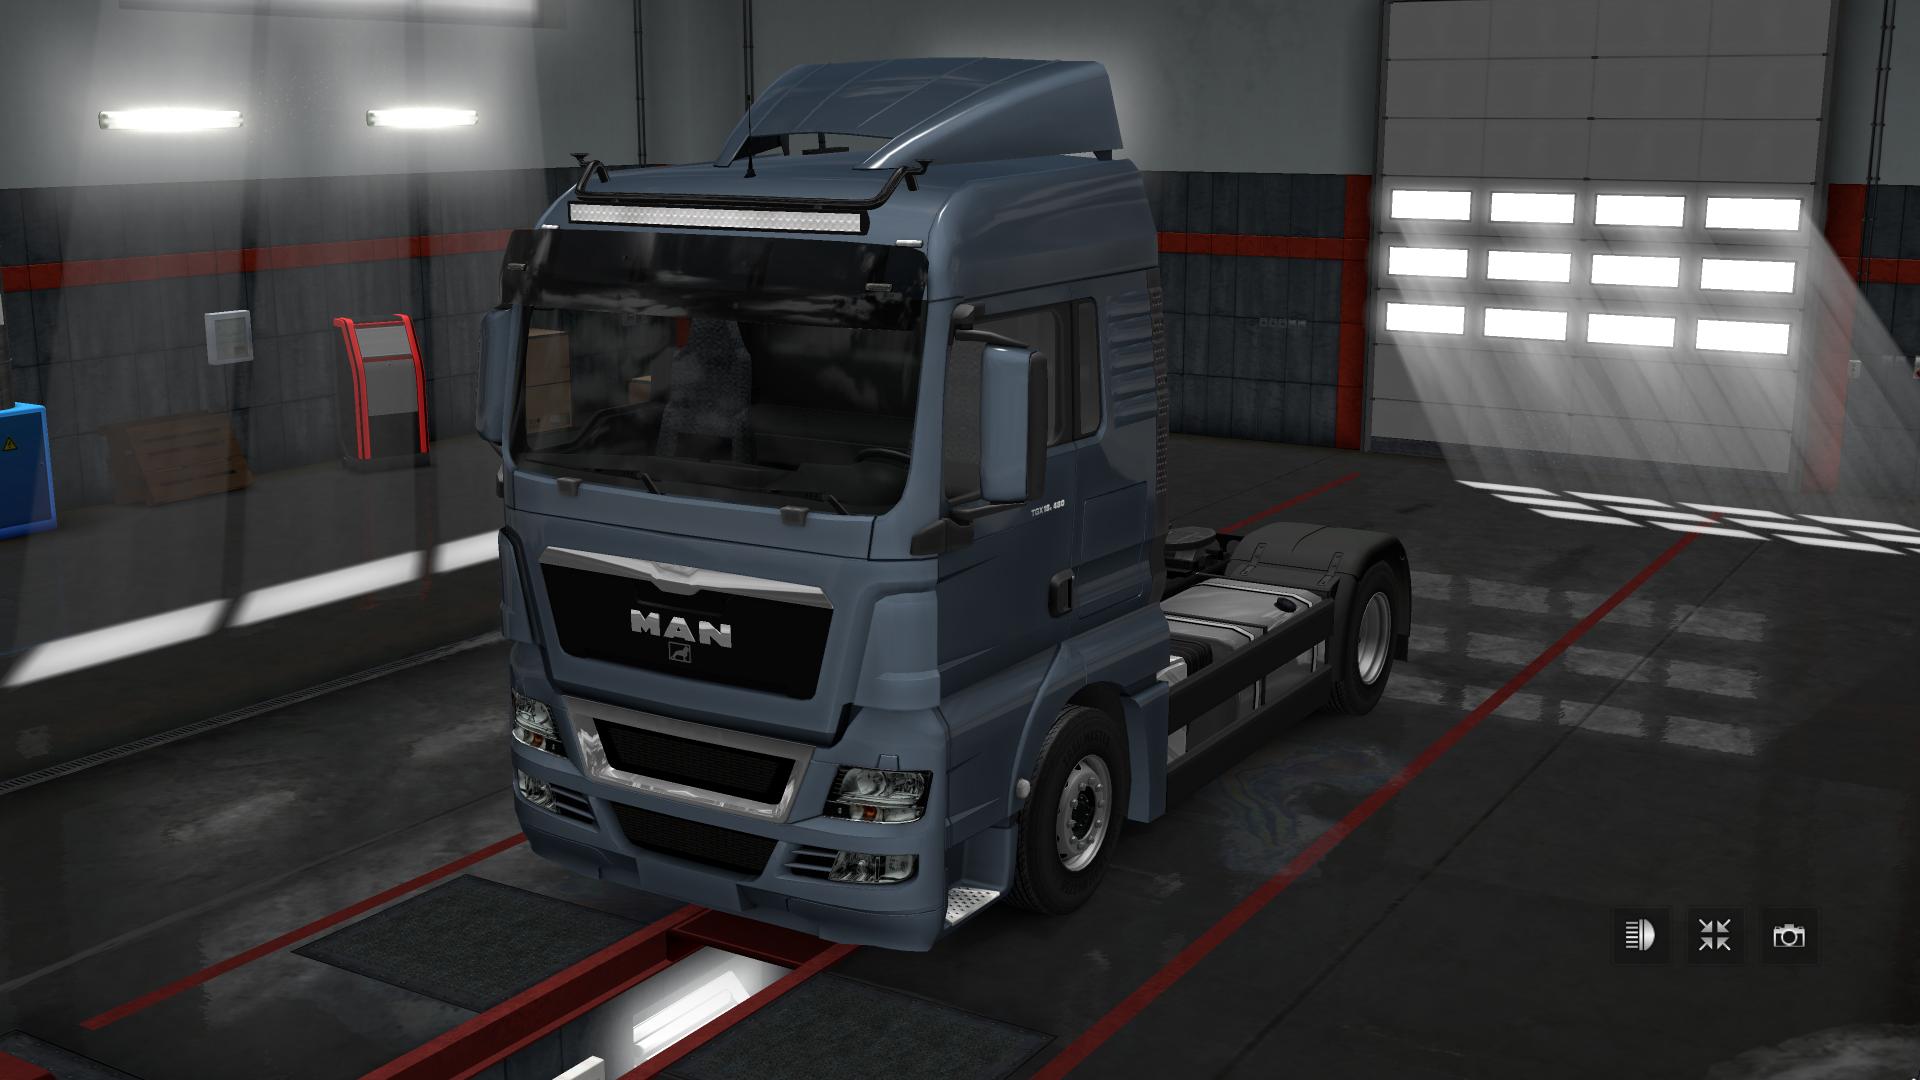 CONSTRUCTION ROOF GRILL + LED BAR V10.04.18 TUNING MOD - Euro Truck 2 Mods | American Truck Simulator Mods